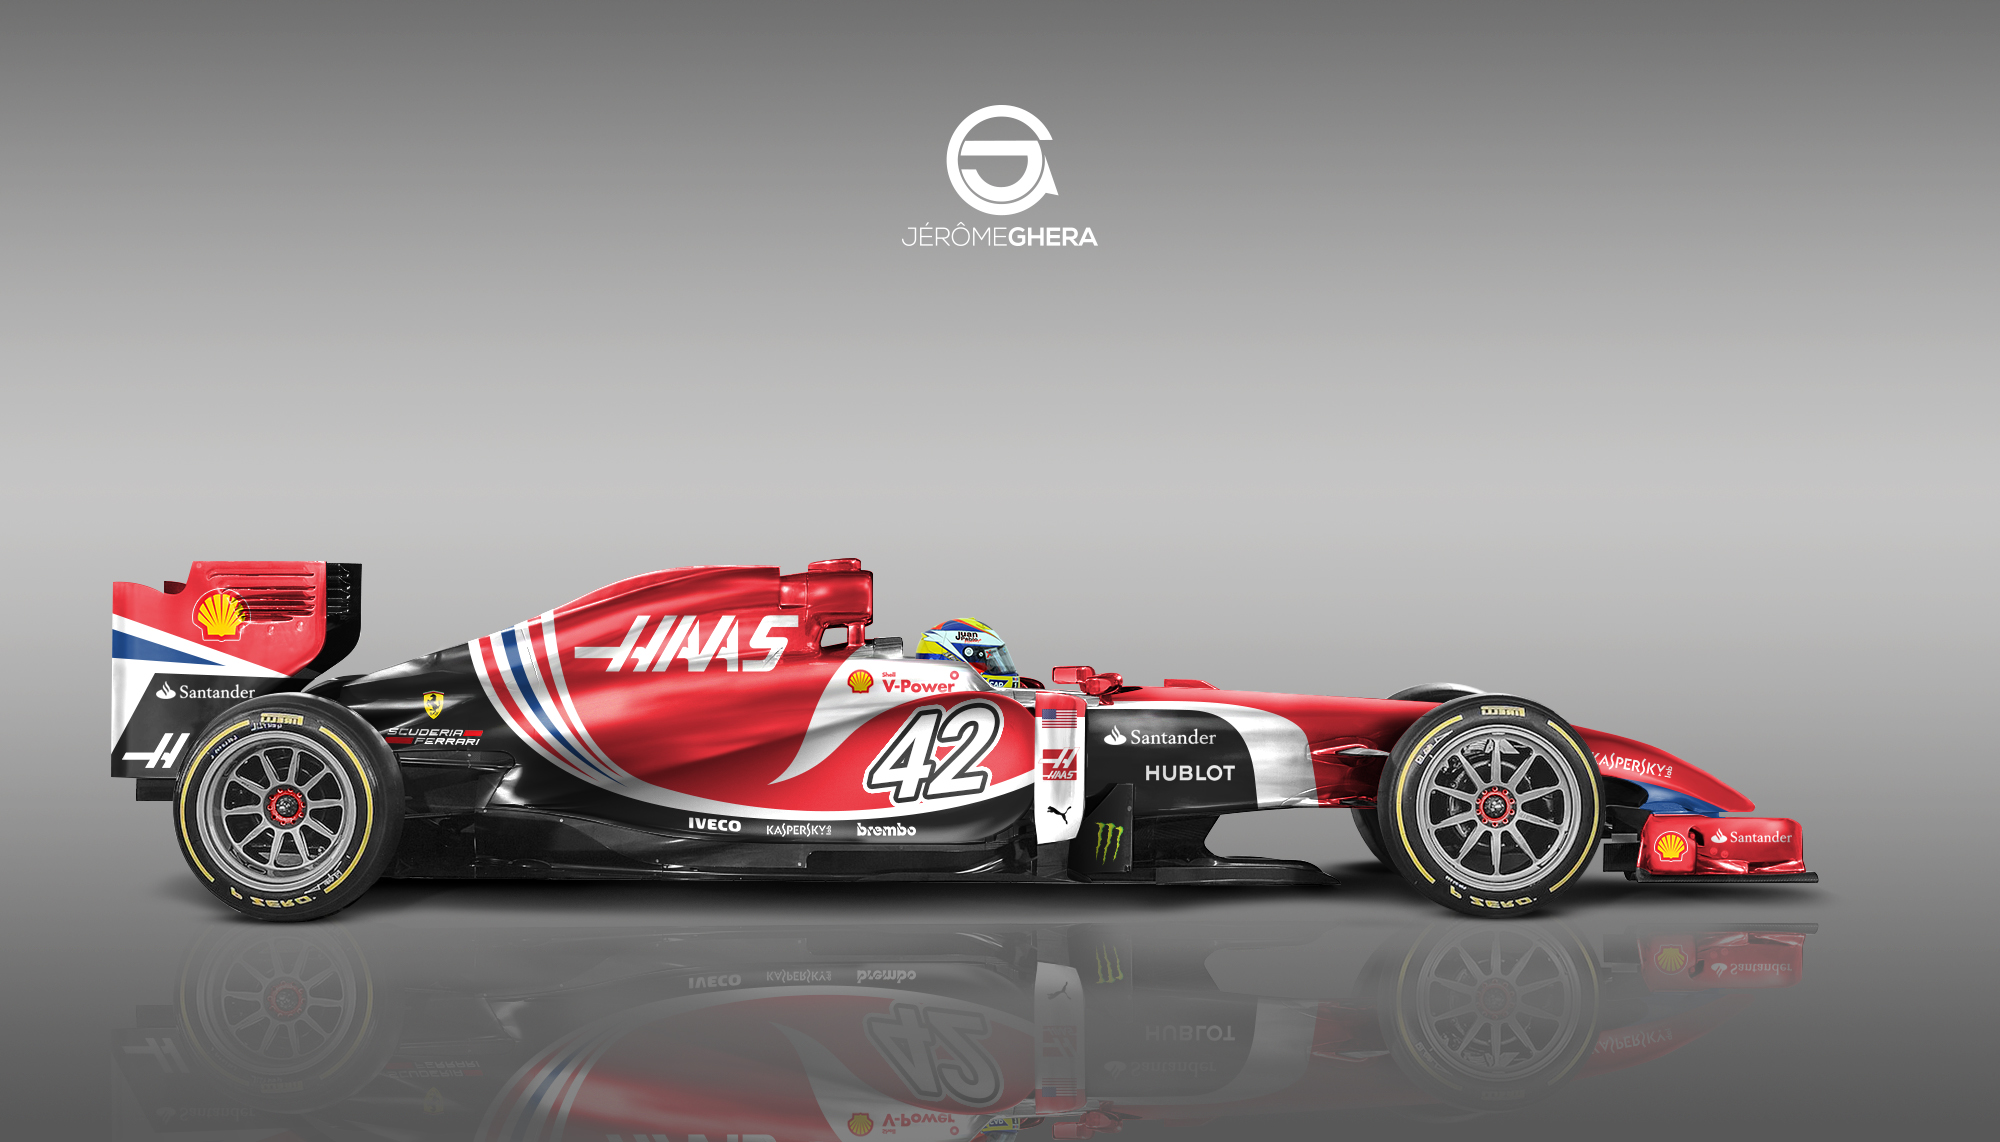 download free haas f1 2016